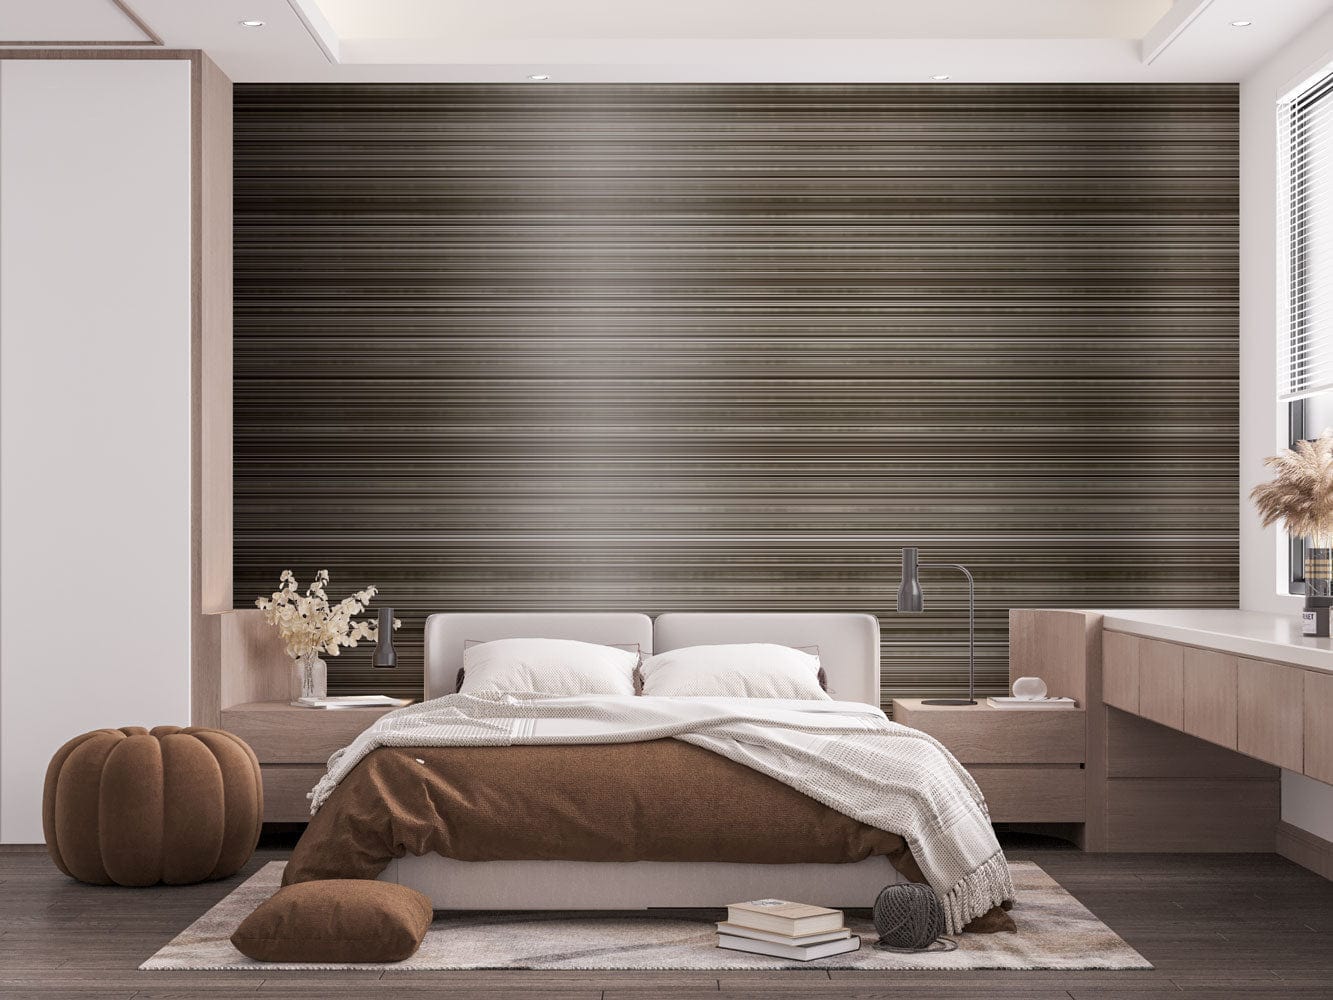 Wallpaper mural in brown with brushed metals for use in decorating bedrooms